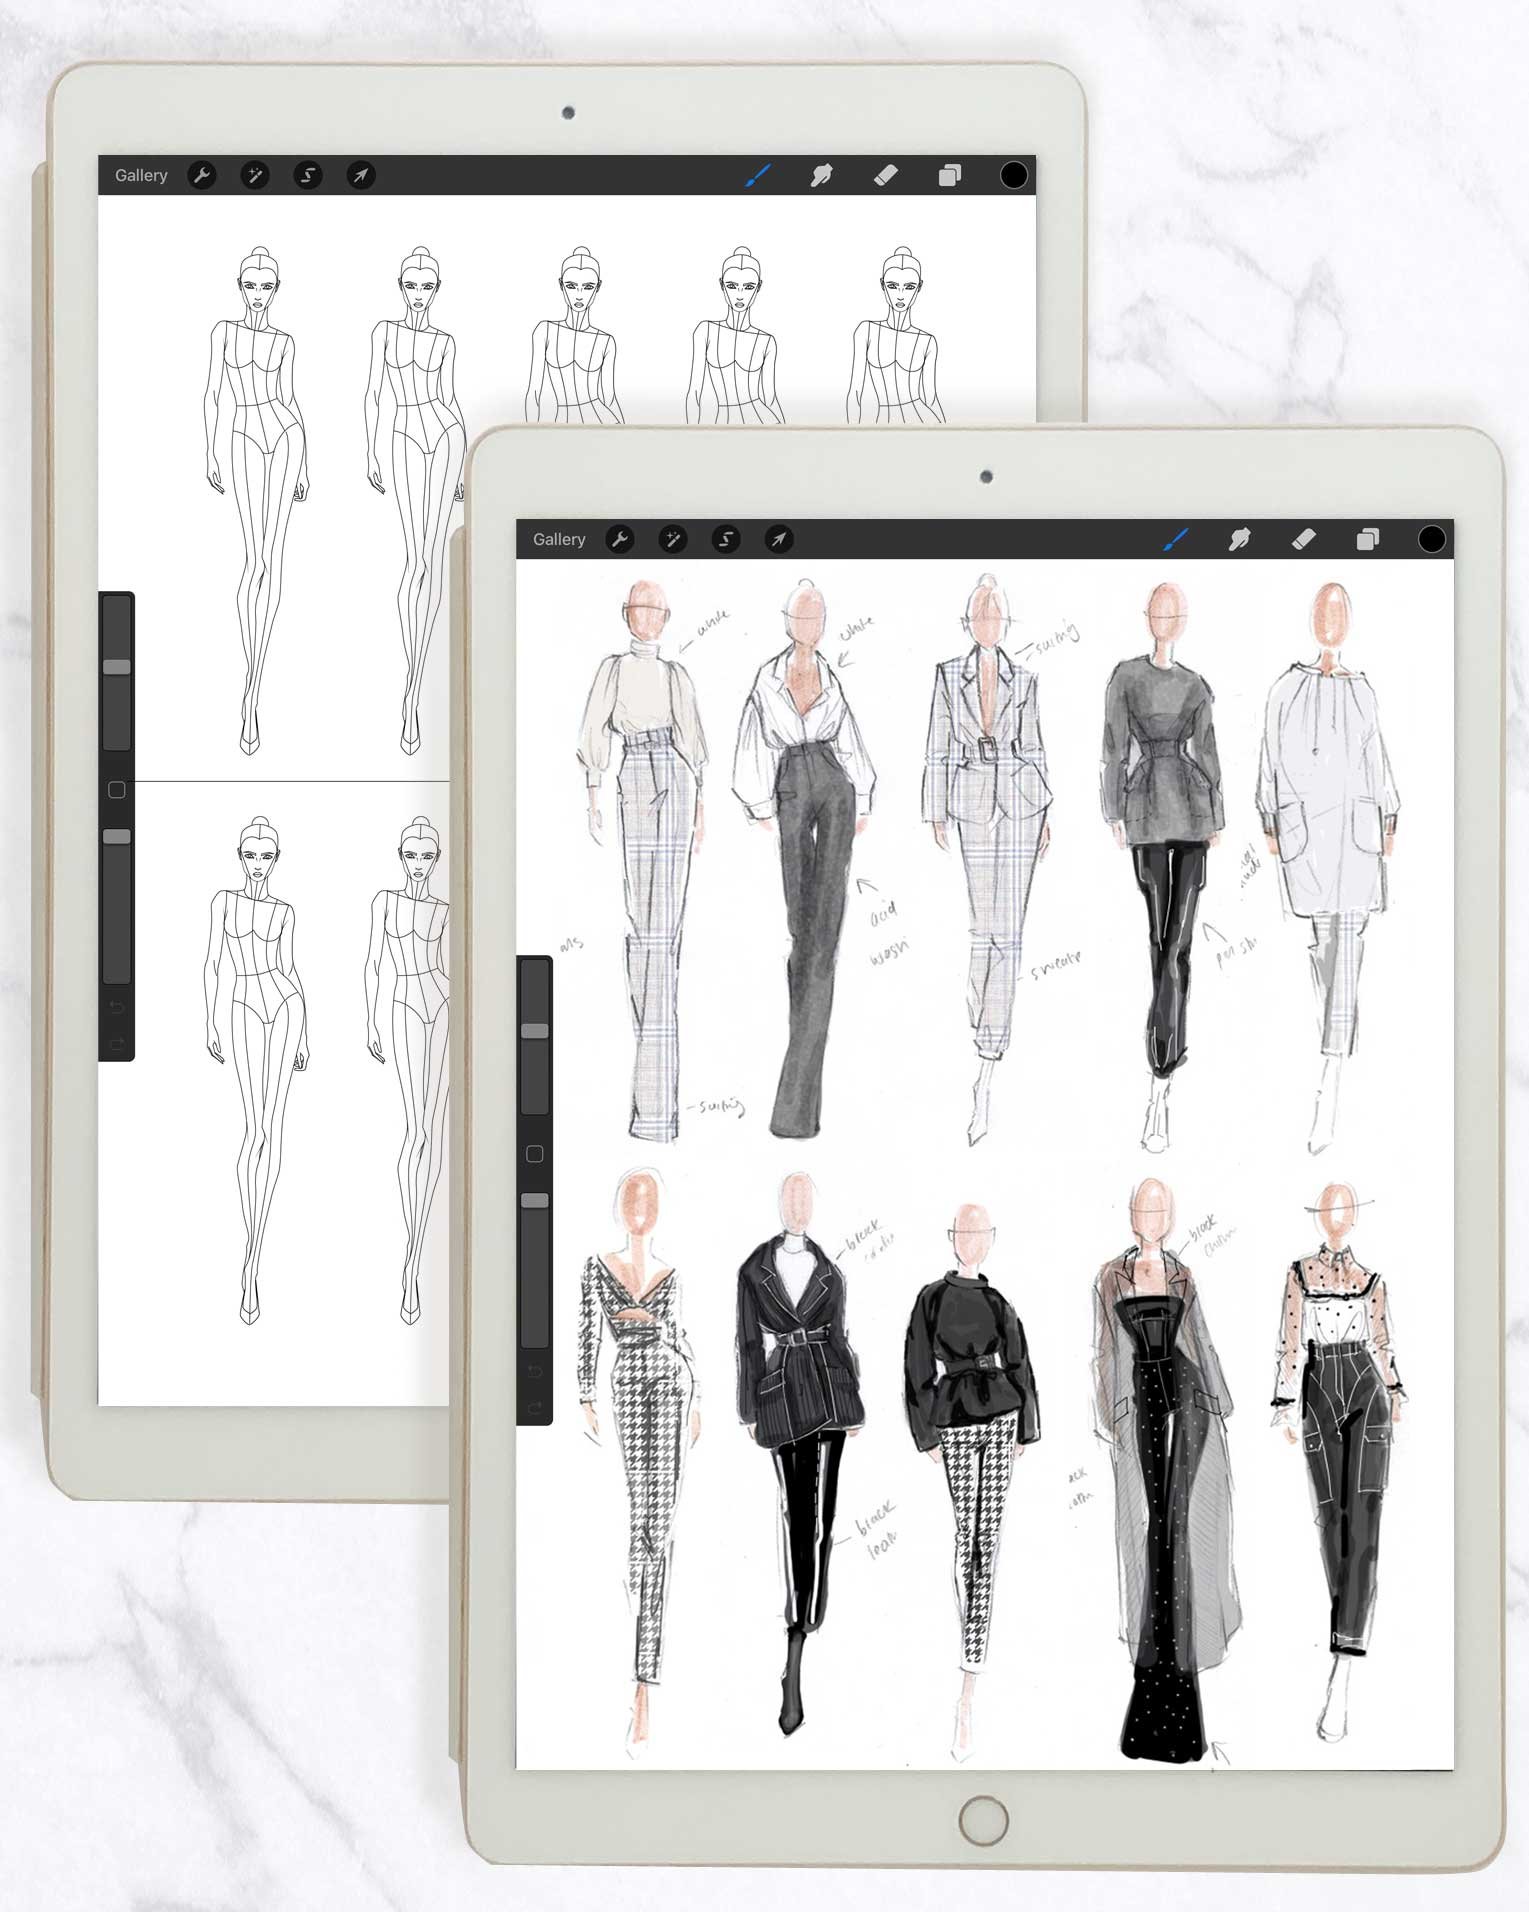 Fashion figure templates in smaller scale for digital thumbnail fashion sketching